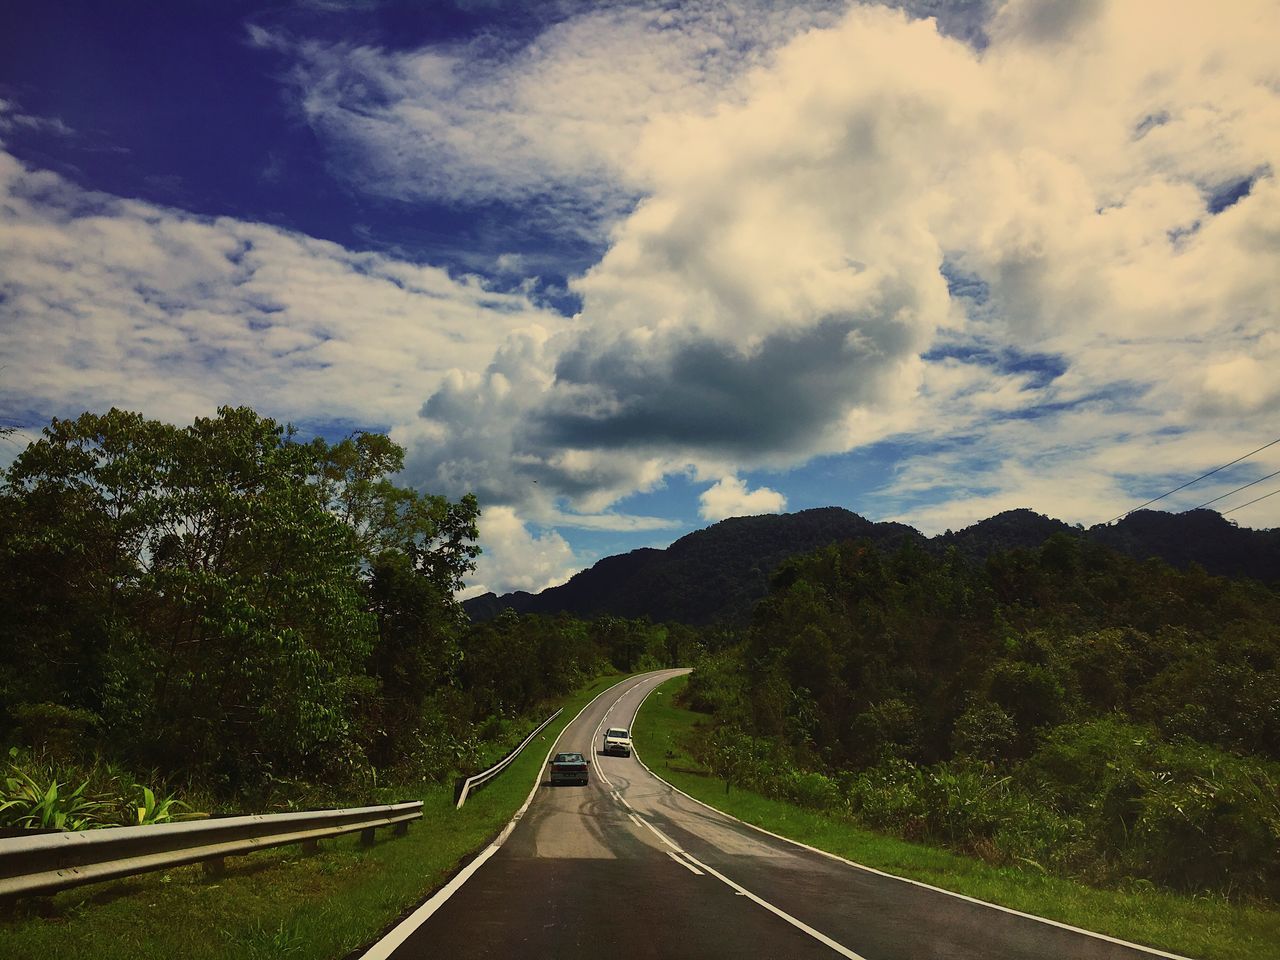 road, the way forward, transportation, cloud - sky, sky, mountain, tree, highway, scenics, landscape, day, nature, winding road, dividing line, no people, tranquil scene, outdoors, mountain range, tranquility, beauty in nature, curve, mountain road